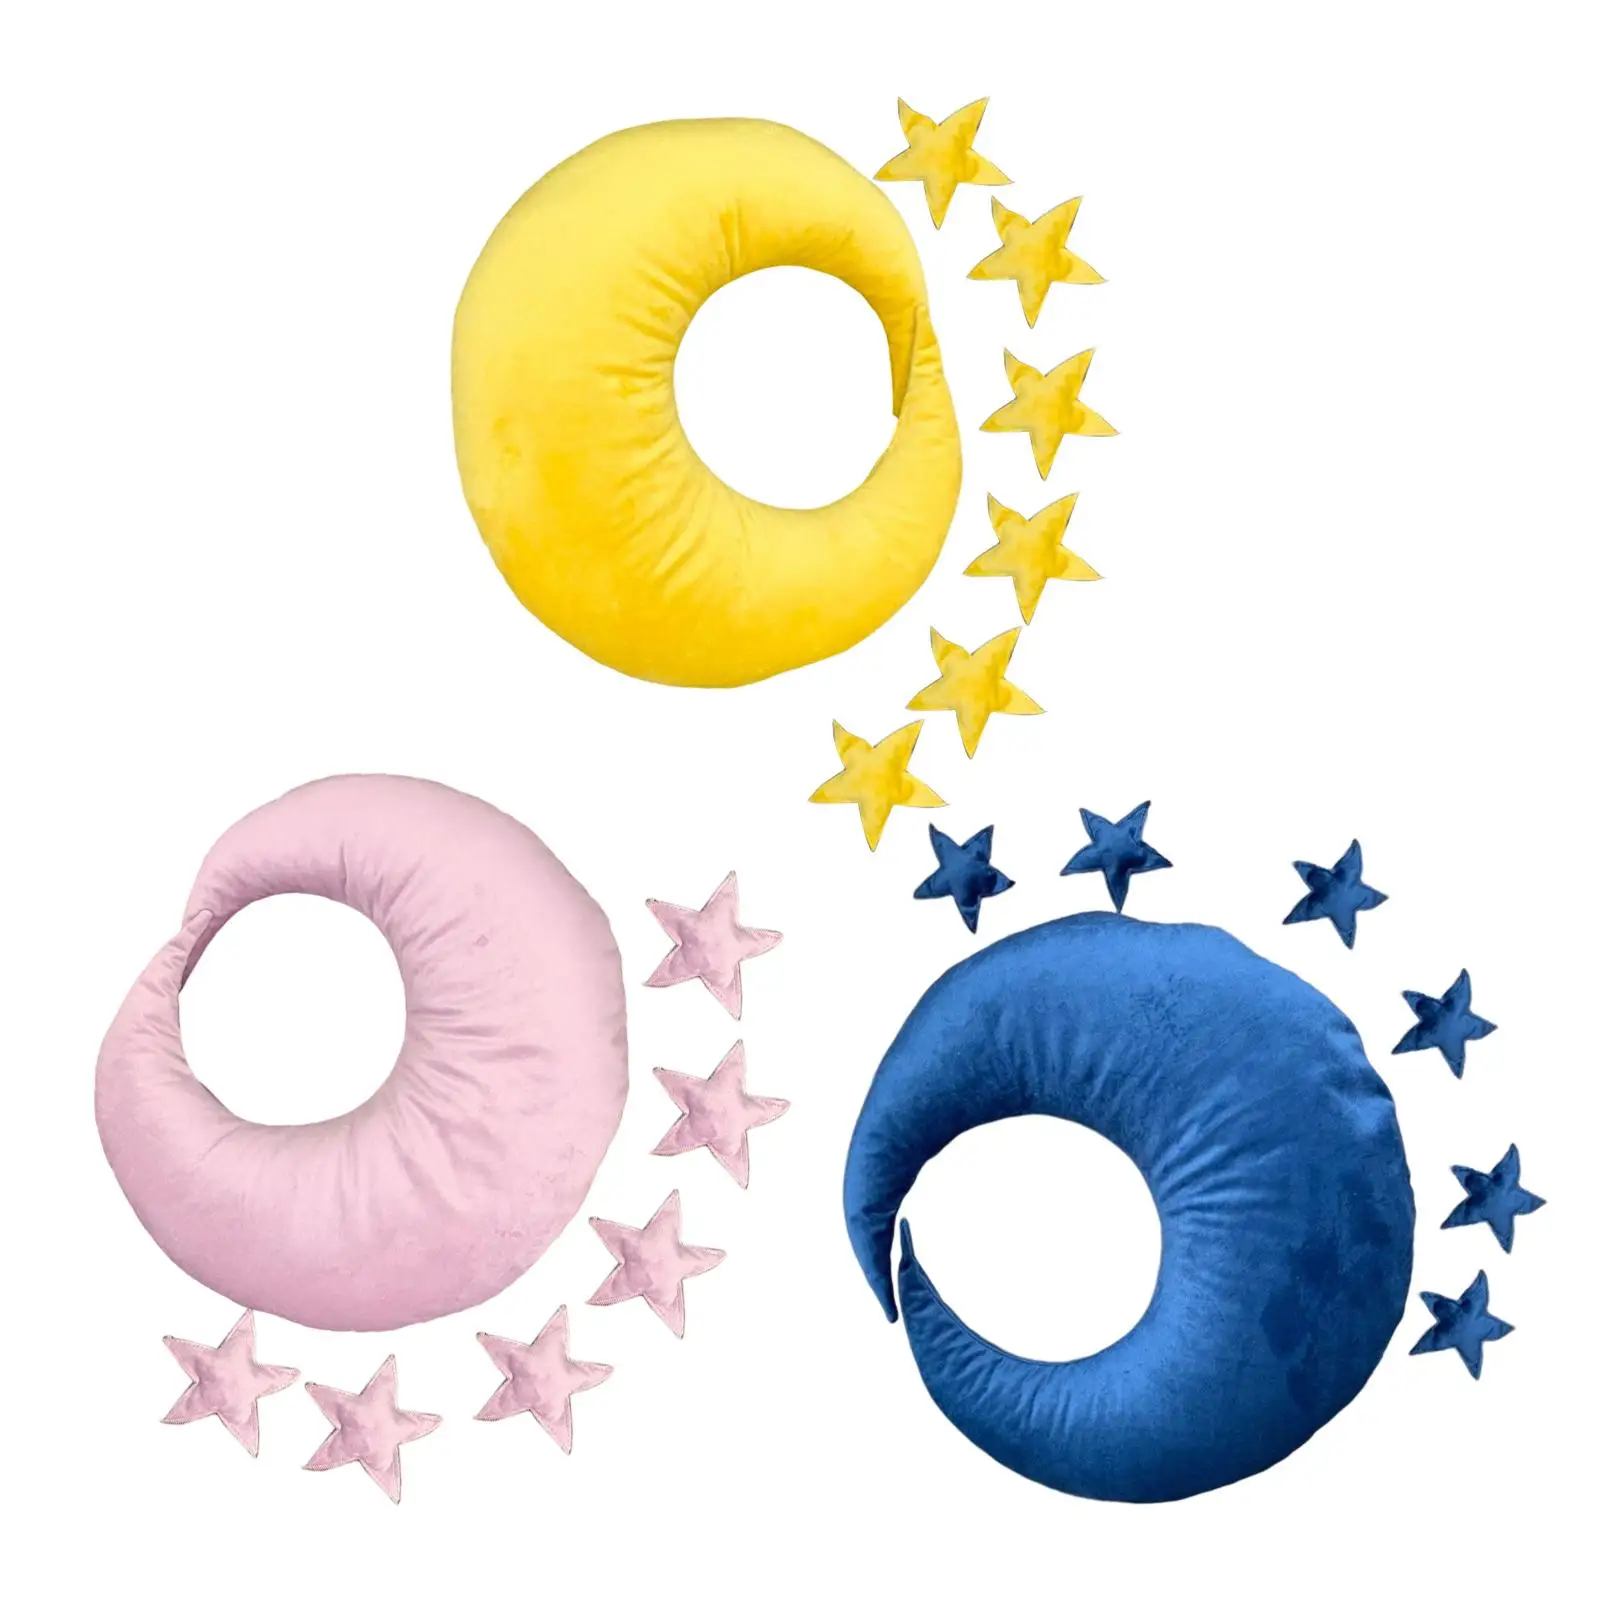 

Newborn Themed Prop Moon Shape Pillow Fully Moon and A Hundred Days Home Decoration Mini for Princess Birthday Party Gifts Twins